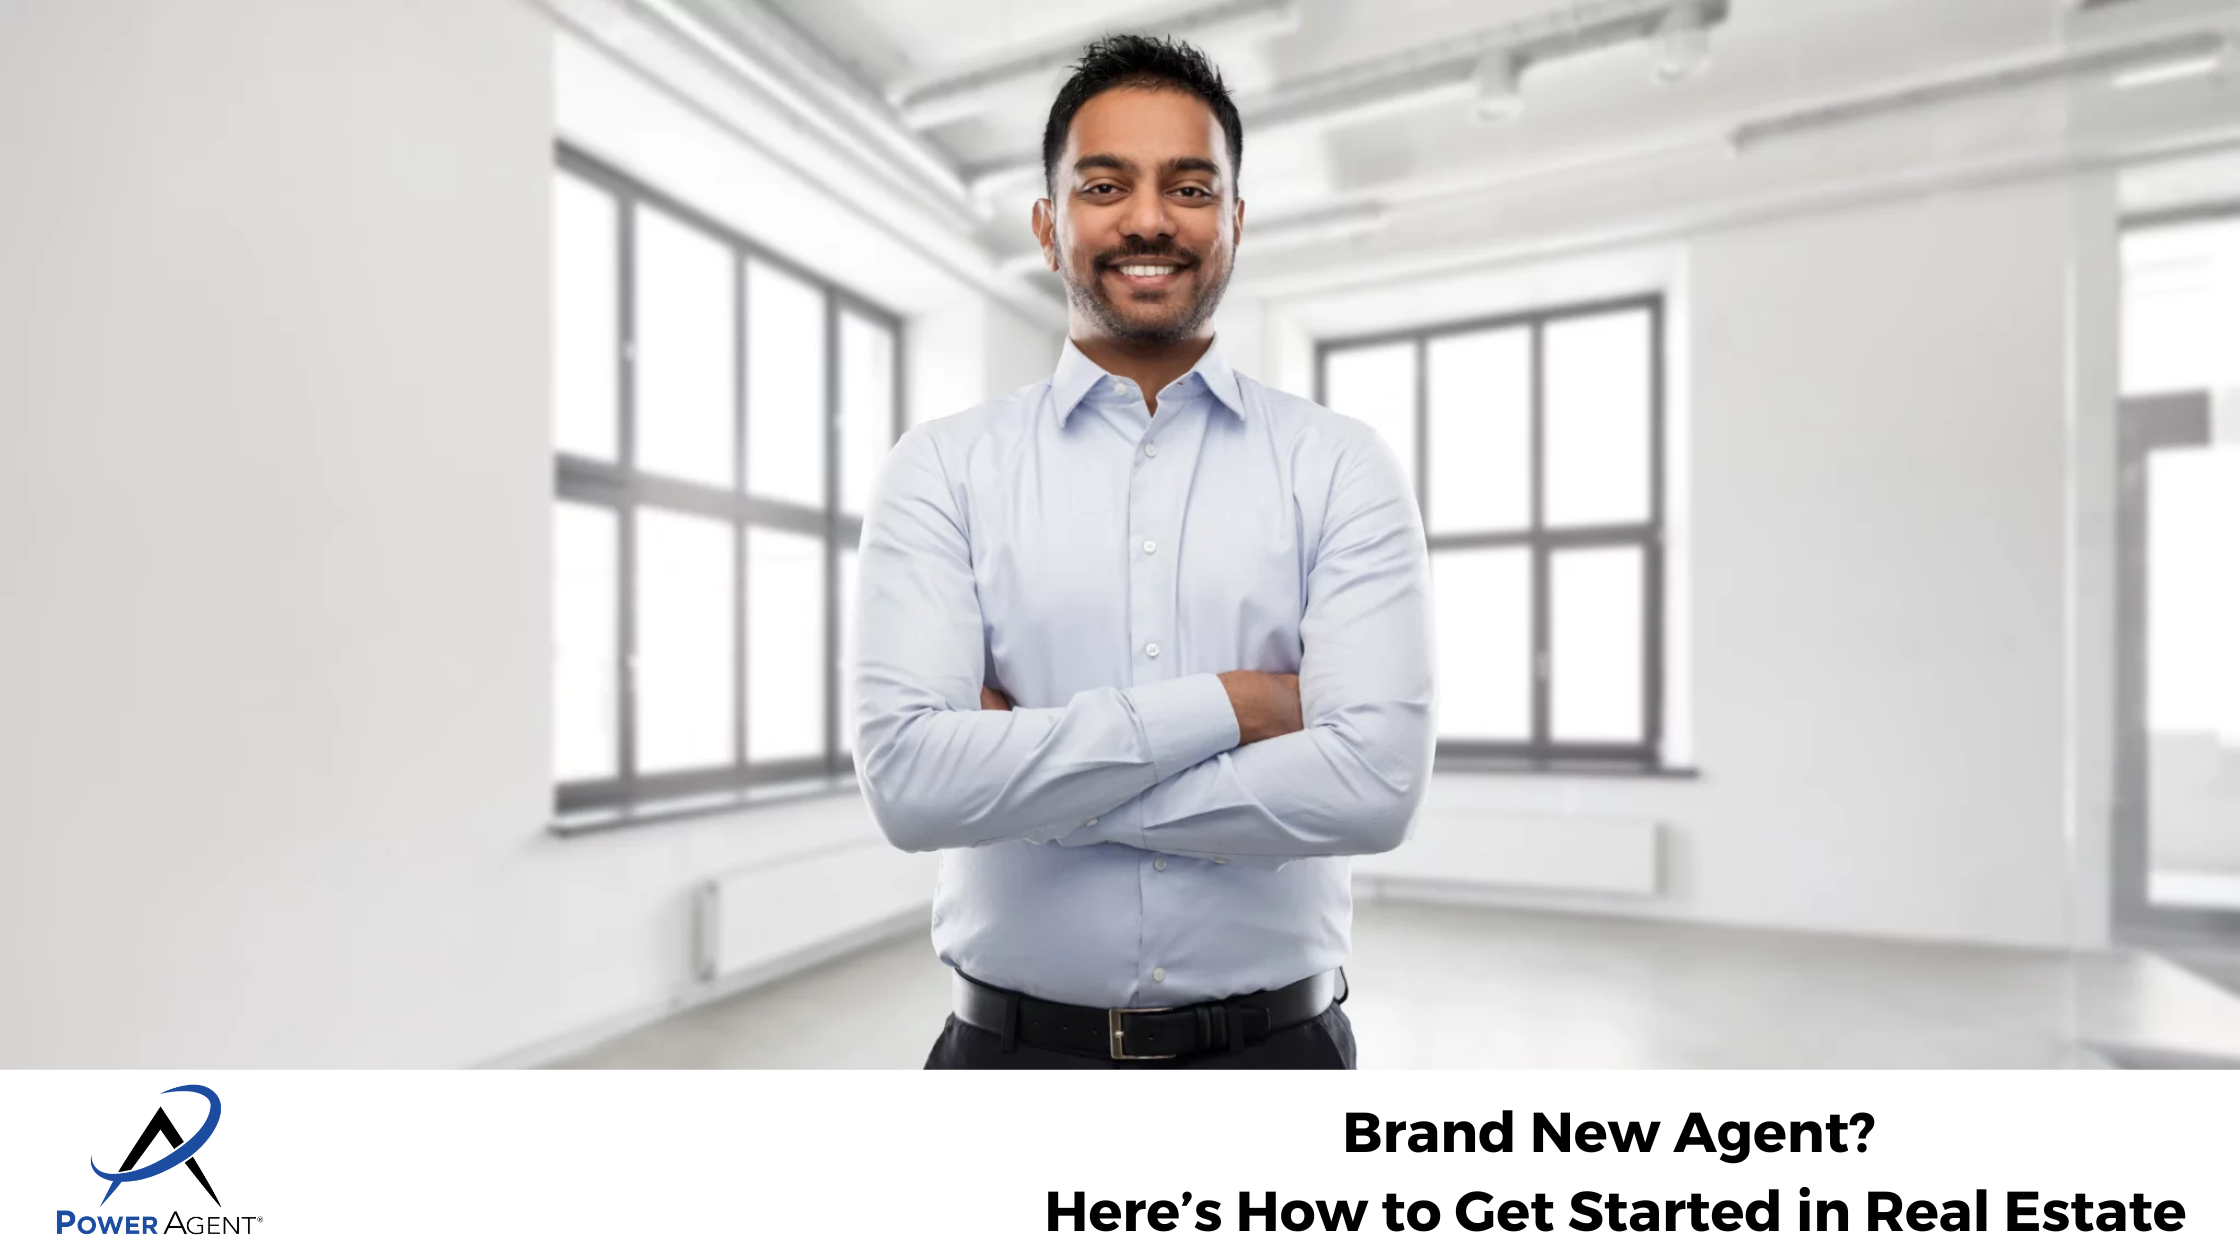 Brand New Agent? Here’s How to Get Started in Real Estate